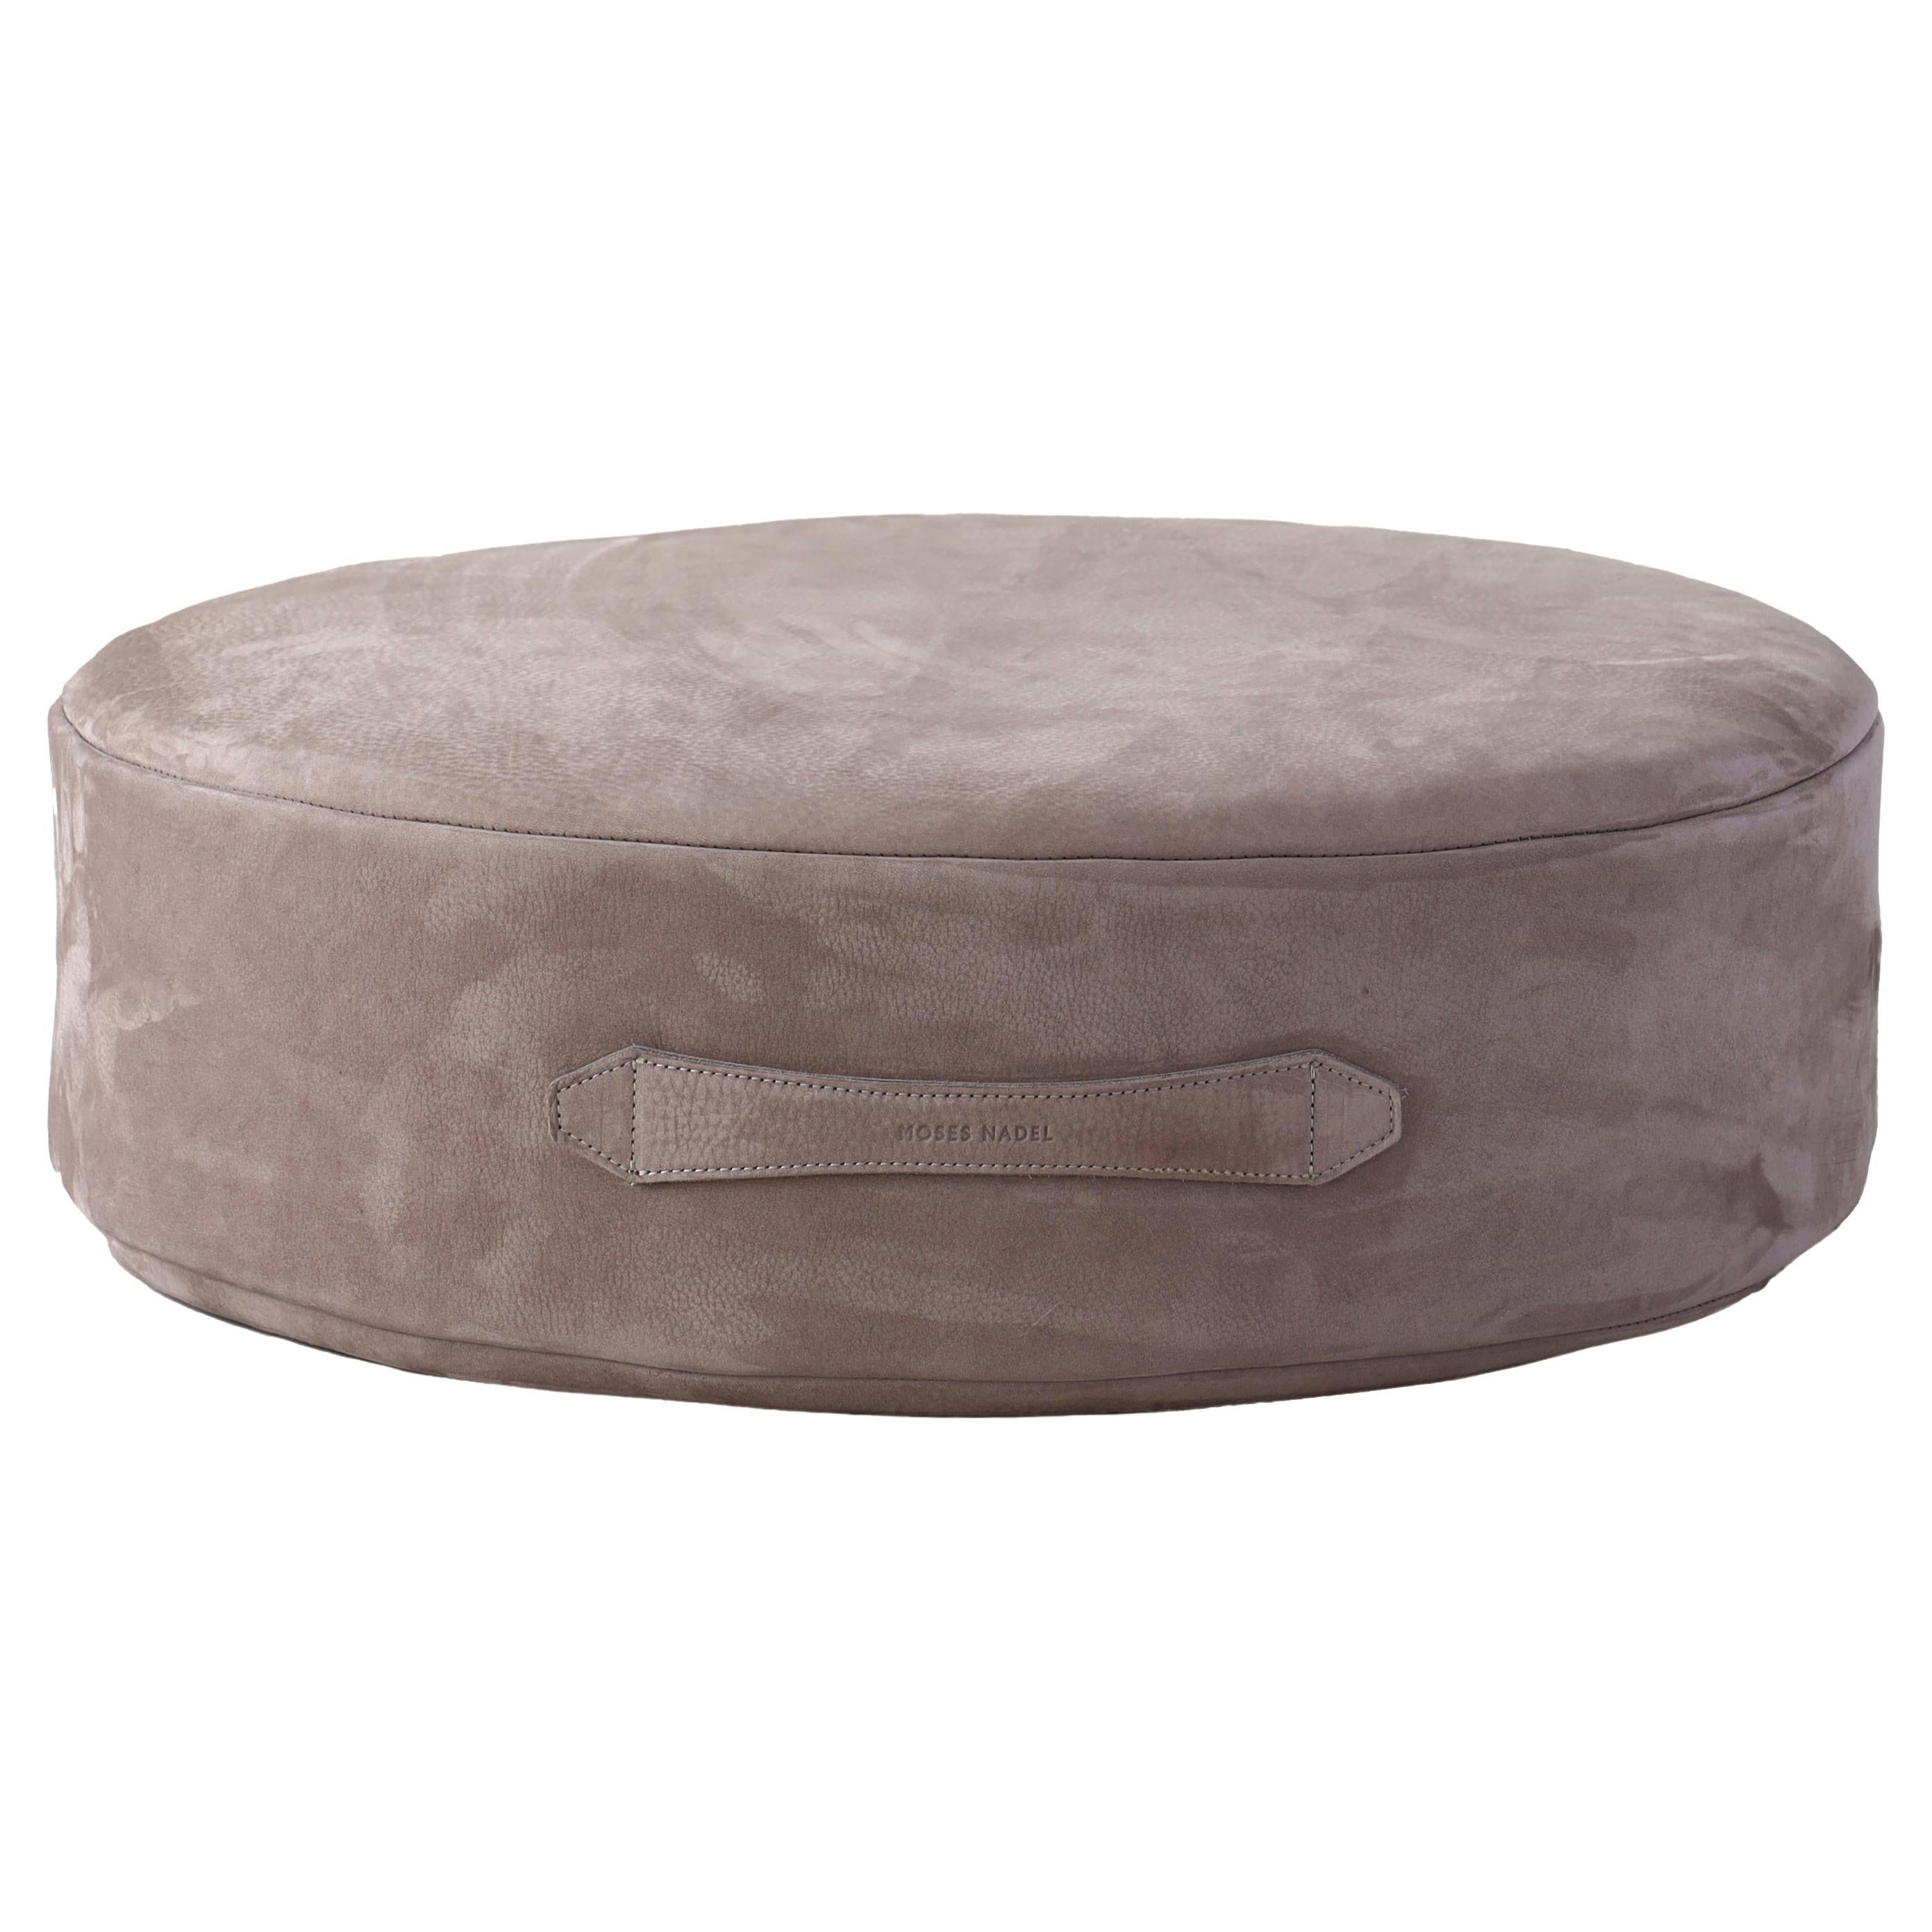 20"Ø x 5" Puck Floor Cushion in Storm Nubuck Leather by Moses Nadel For Sale